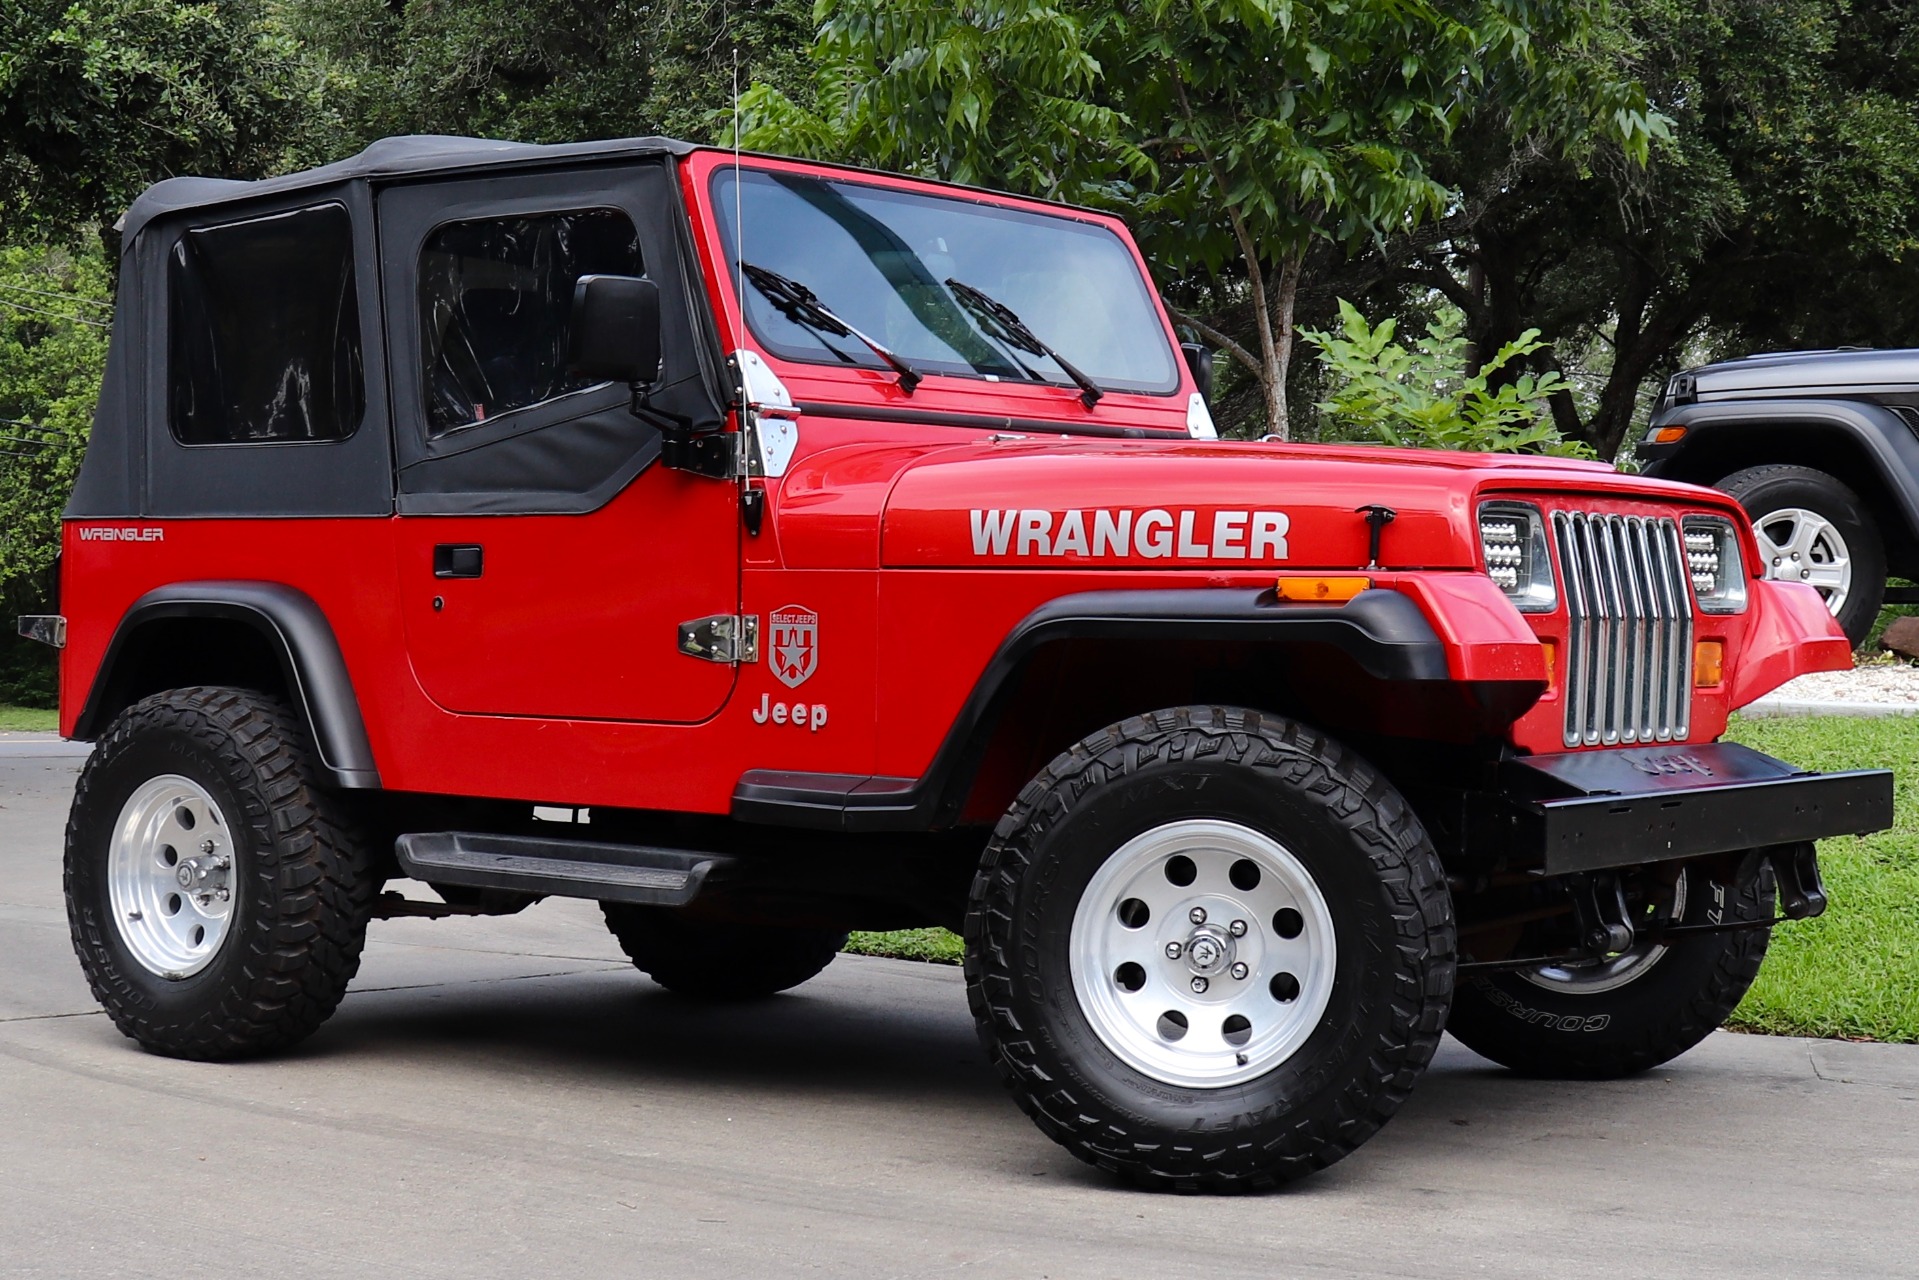 Used 1995 Jeep Wrangler S For Sale (Special Pricing) | Select Jeeps Inc.  Stock #292530